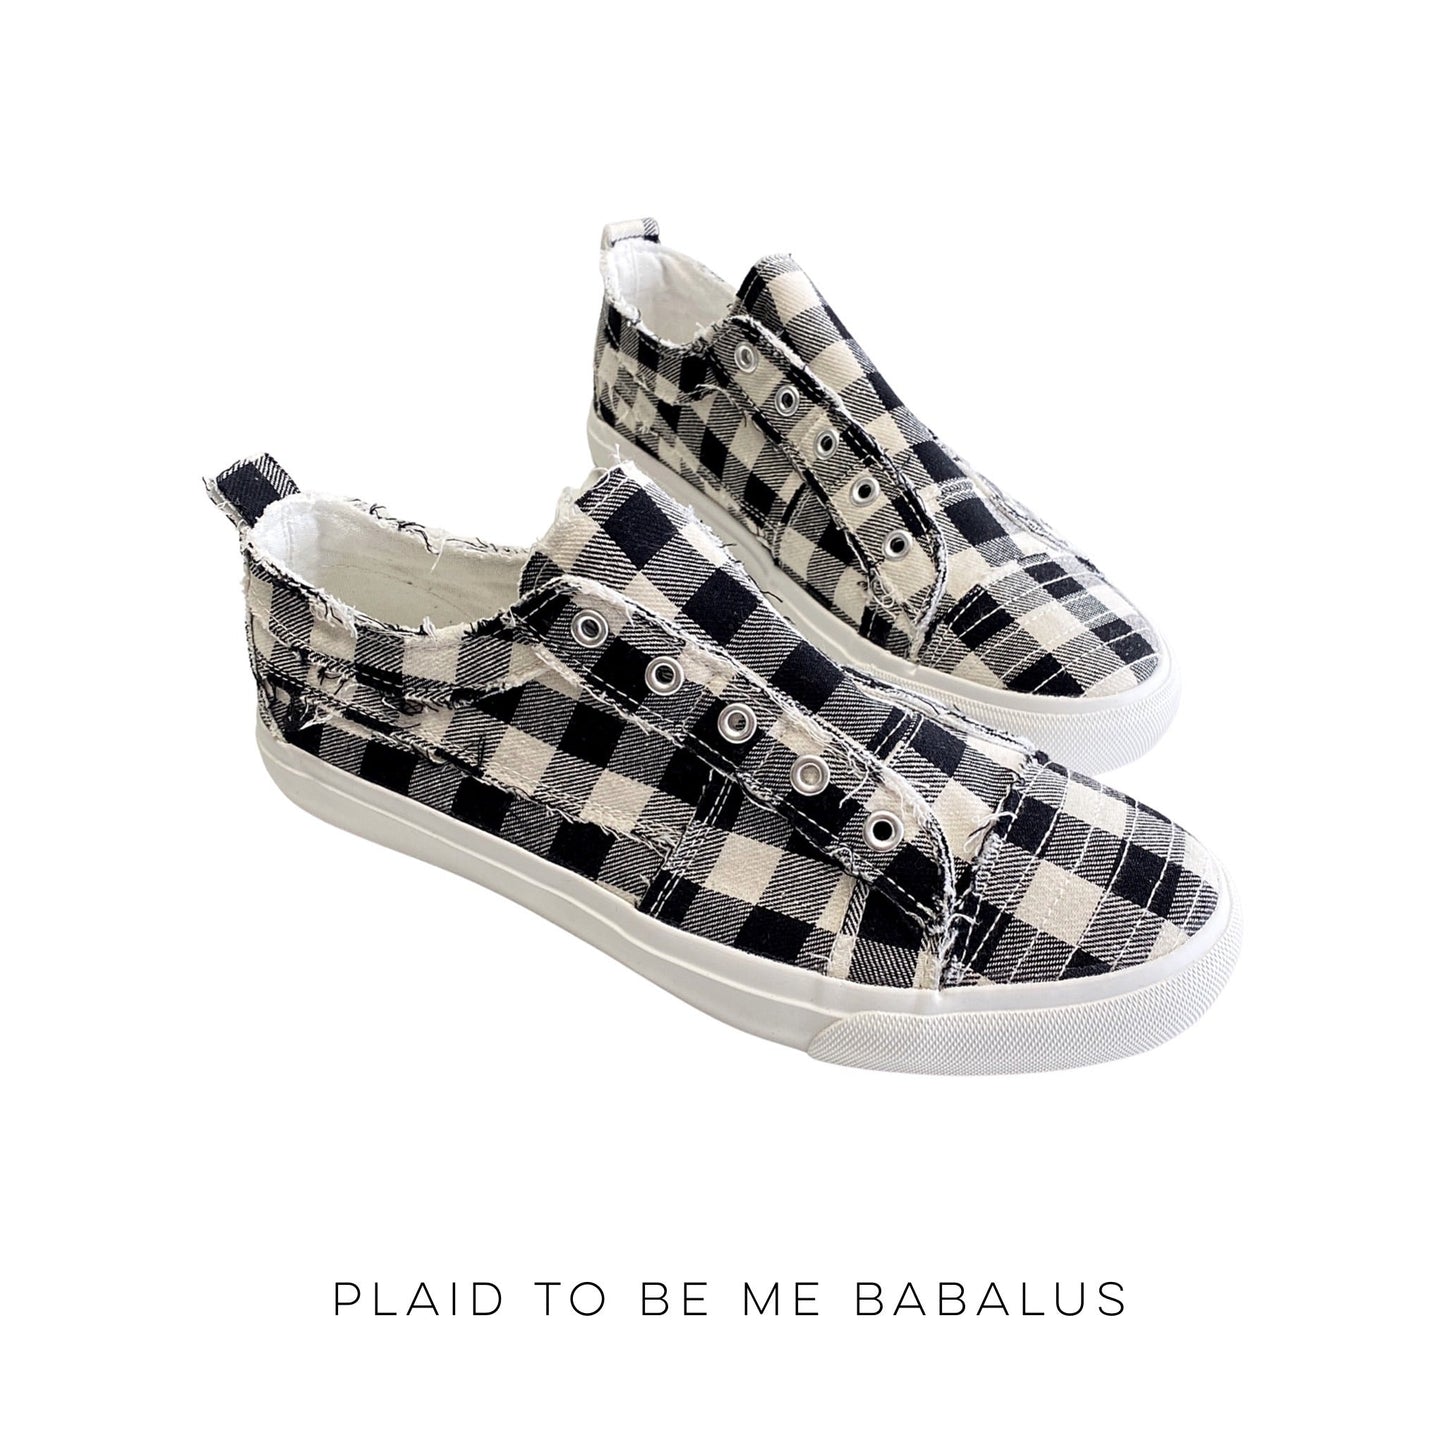 Plaid To Be Me Babalus